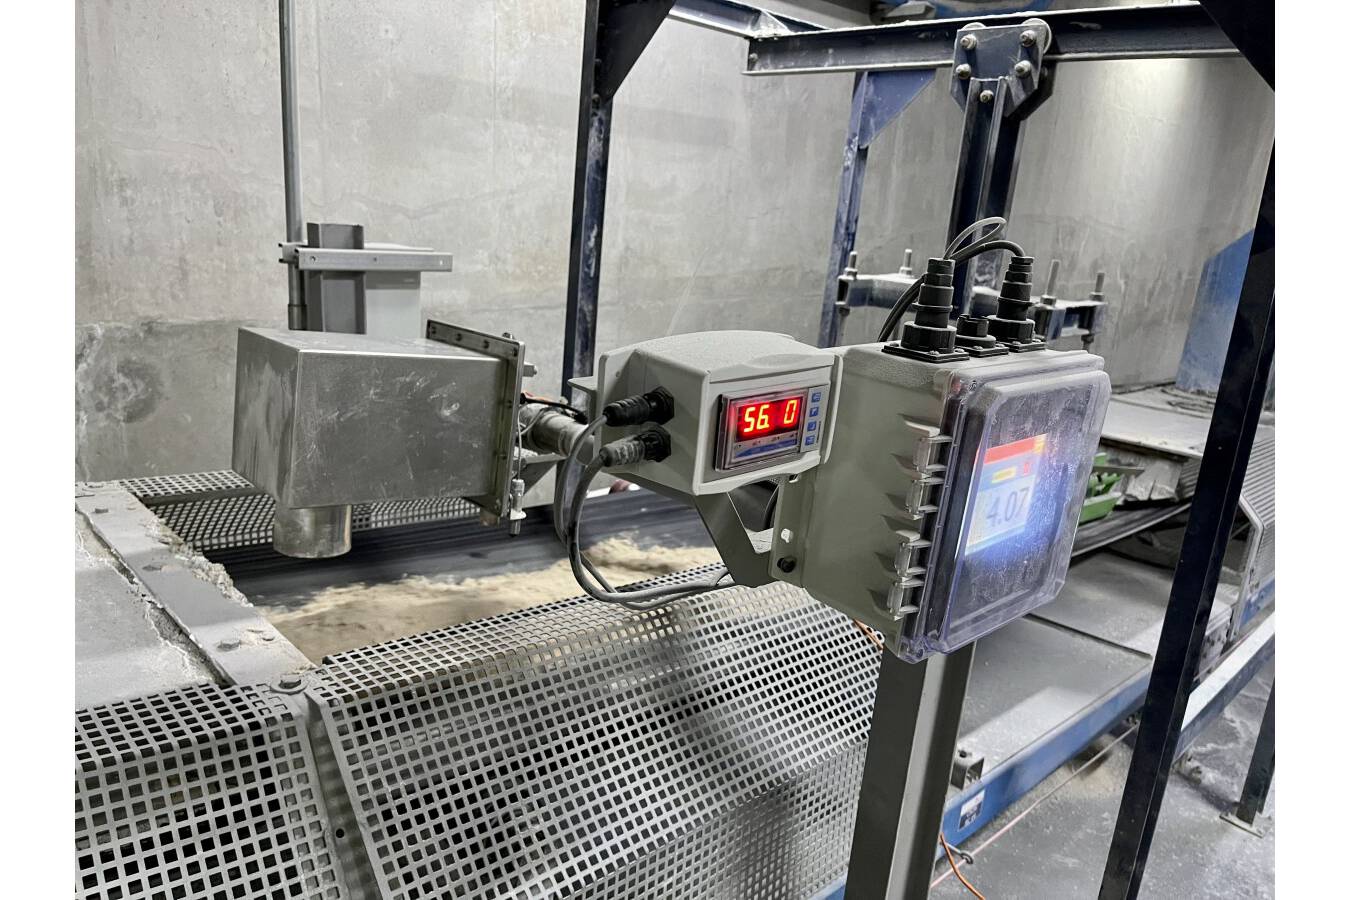 Why Moisture Measurement is Crucial in Powder & Bulk Solids Operations Moisture is important in any manufacturing process, but when it comes to powder & bulk solid processing, excess moisture can ruin products. 
By Adrian Fordham, MoistTech Corp.